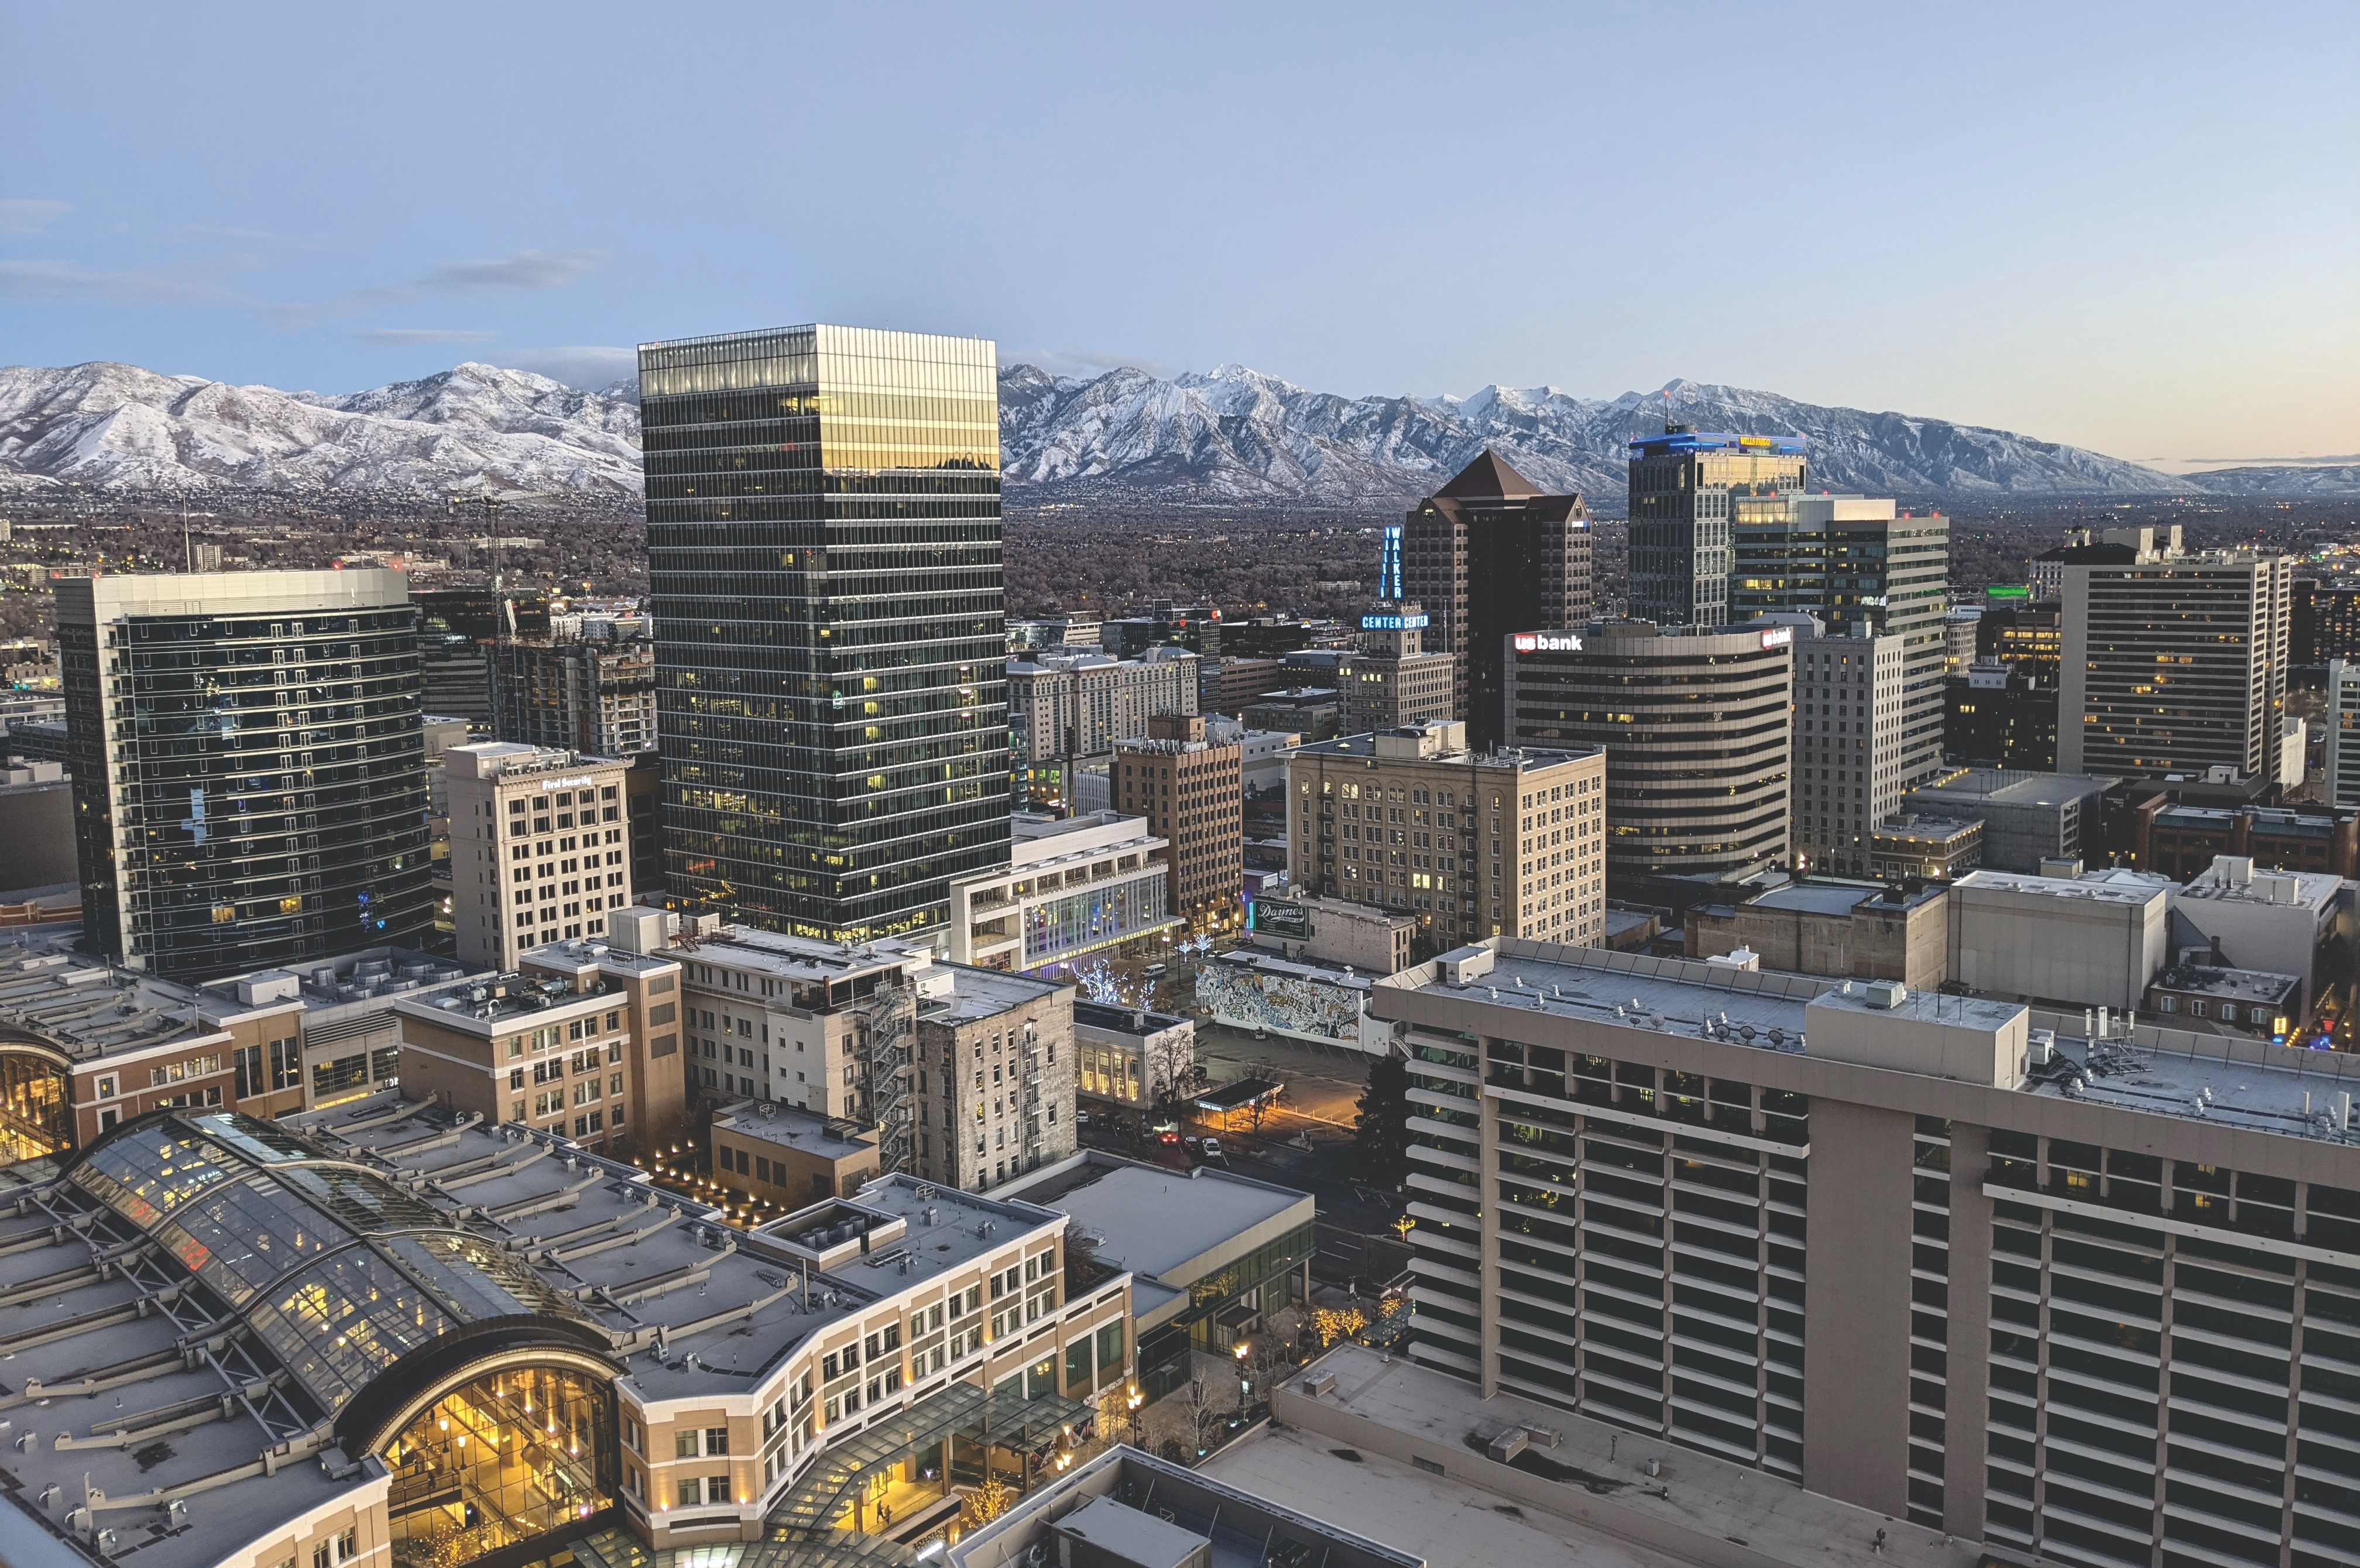 A view of the Salt Lake City skyline, with snowcapped mountains in the background